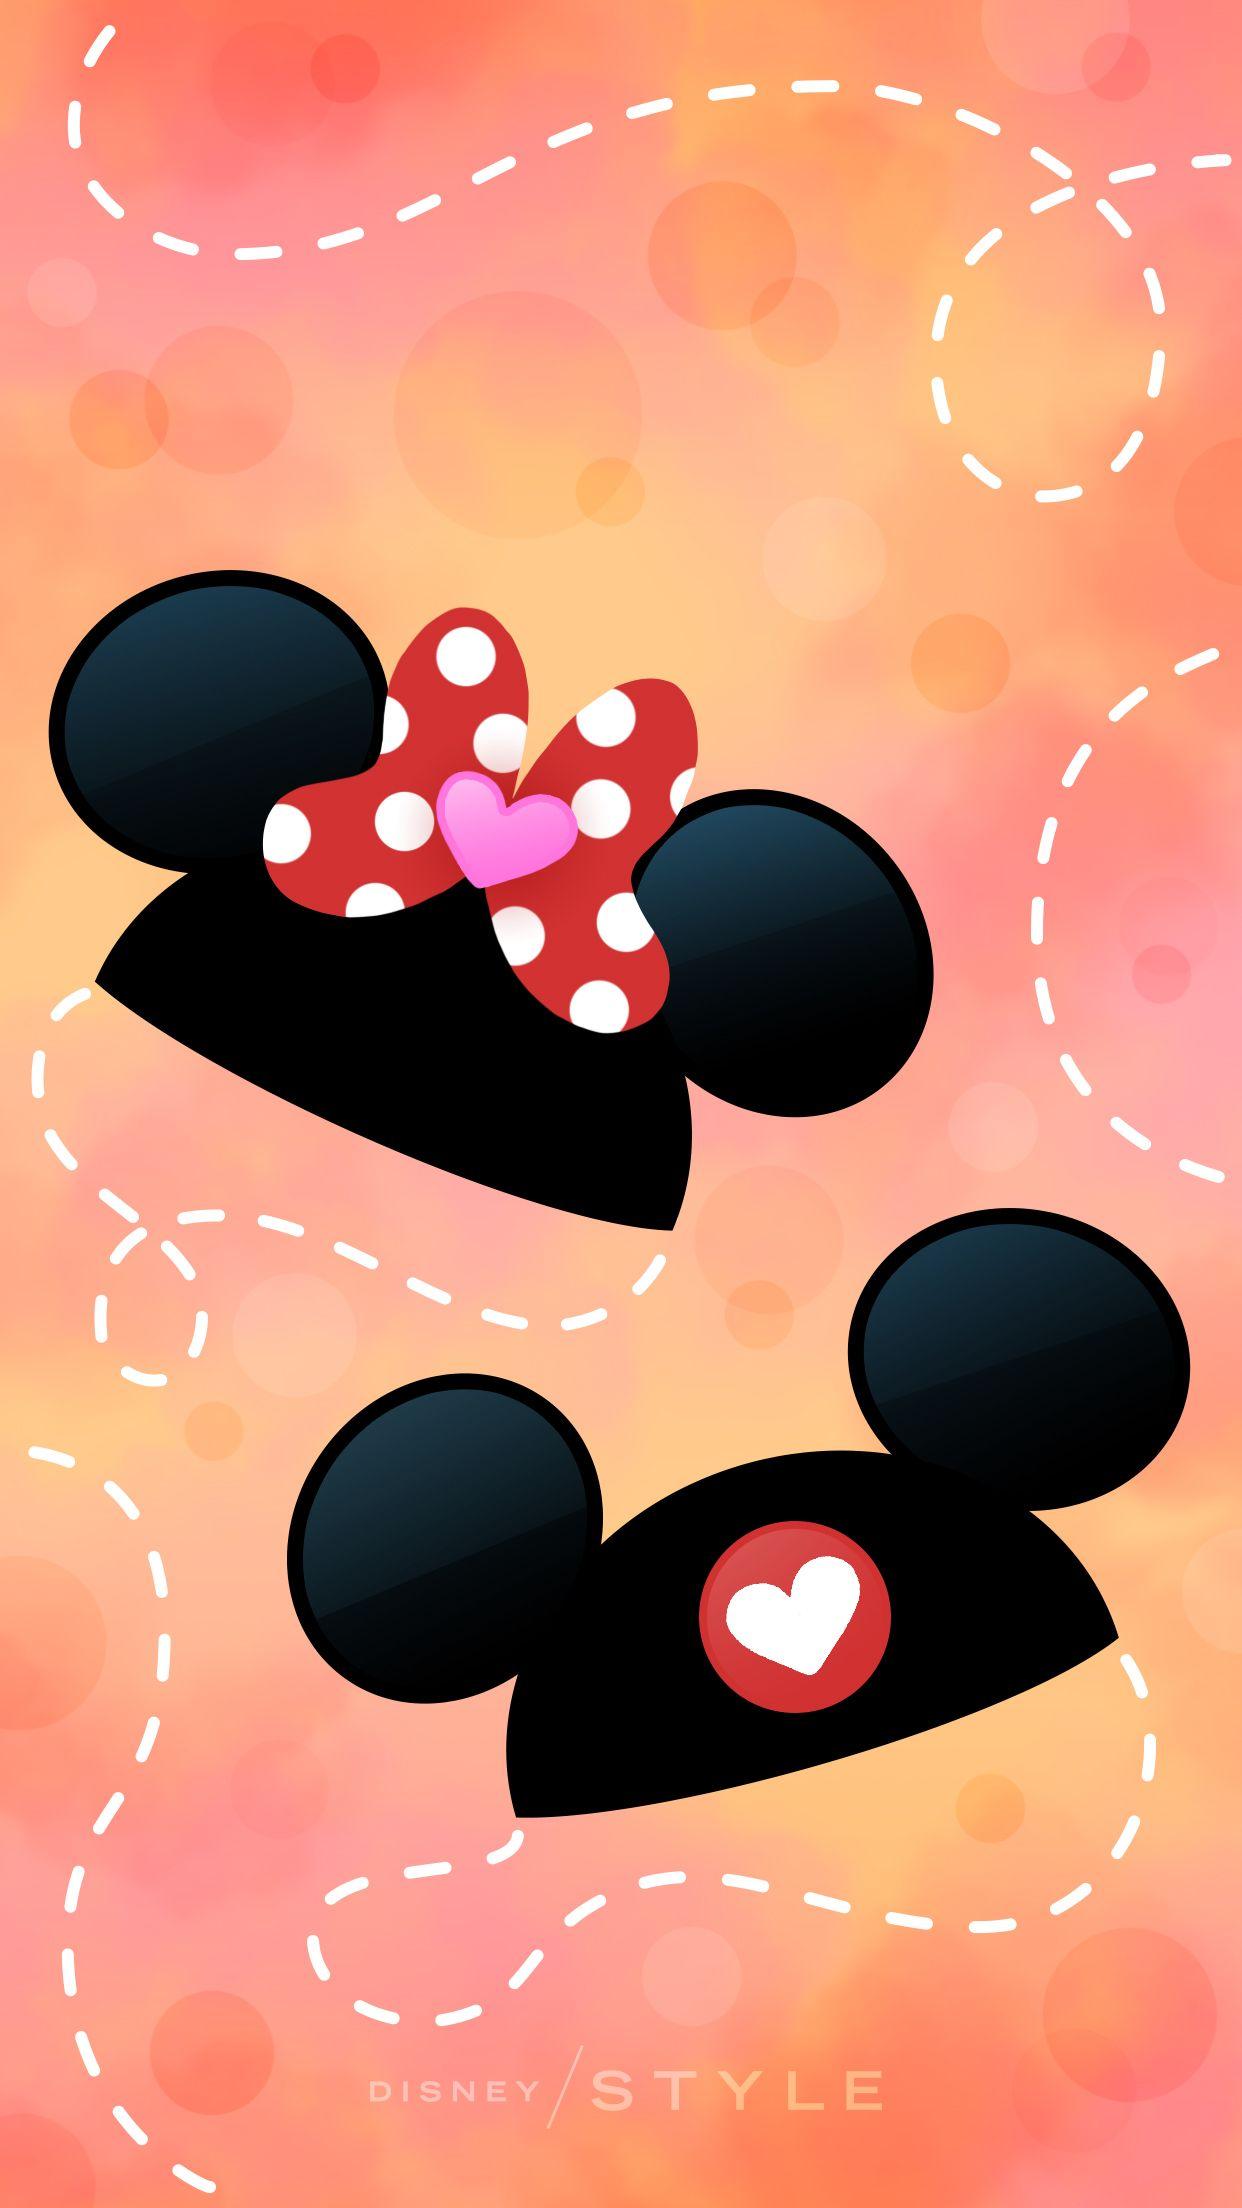 Get Your Phone Ready for Valentine's Day With These Disney